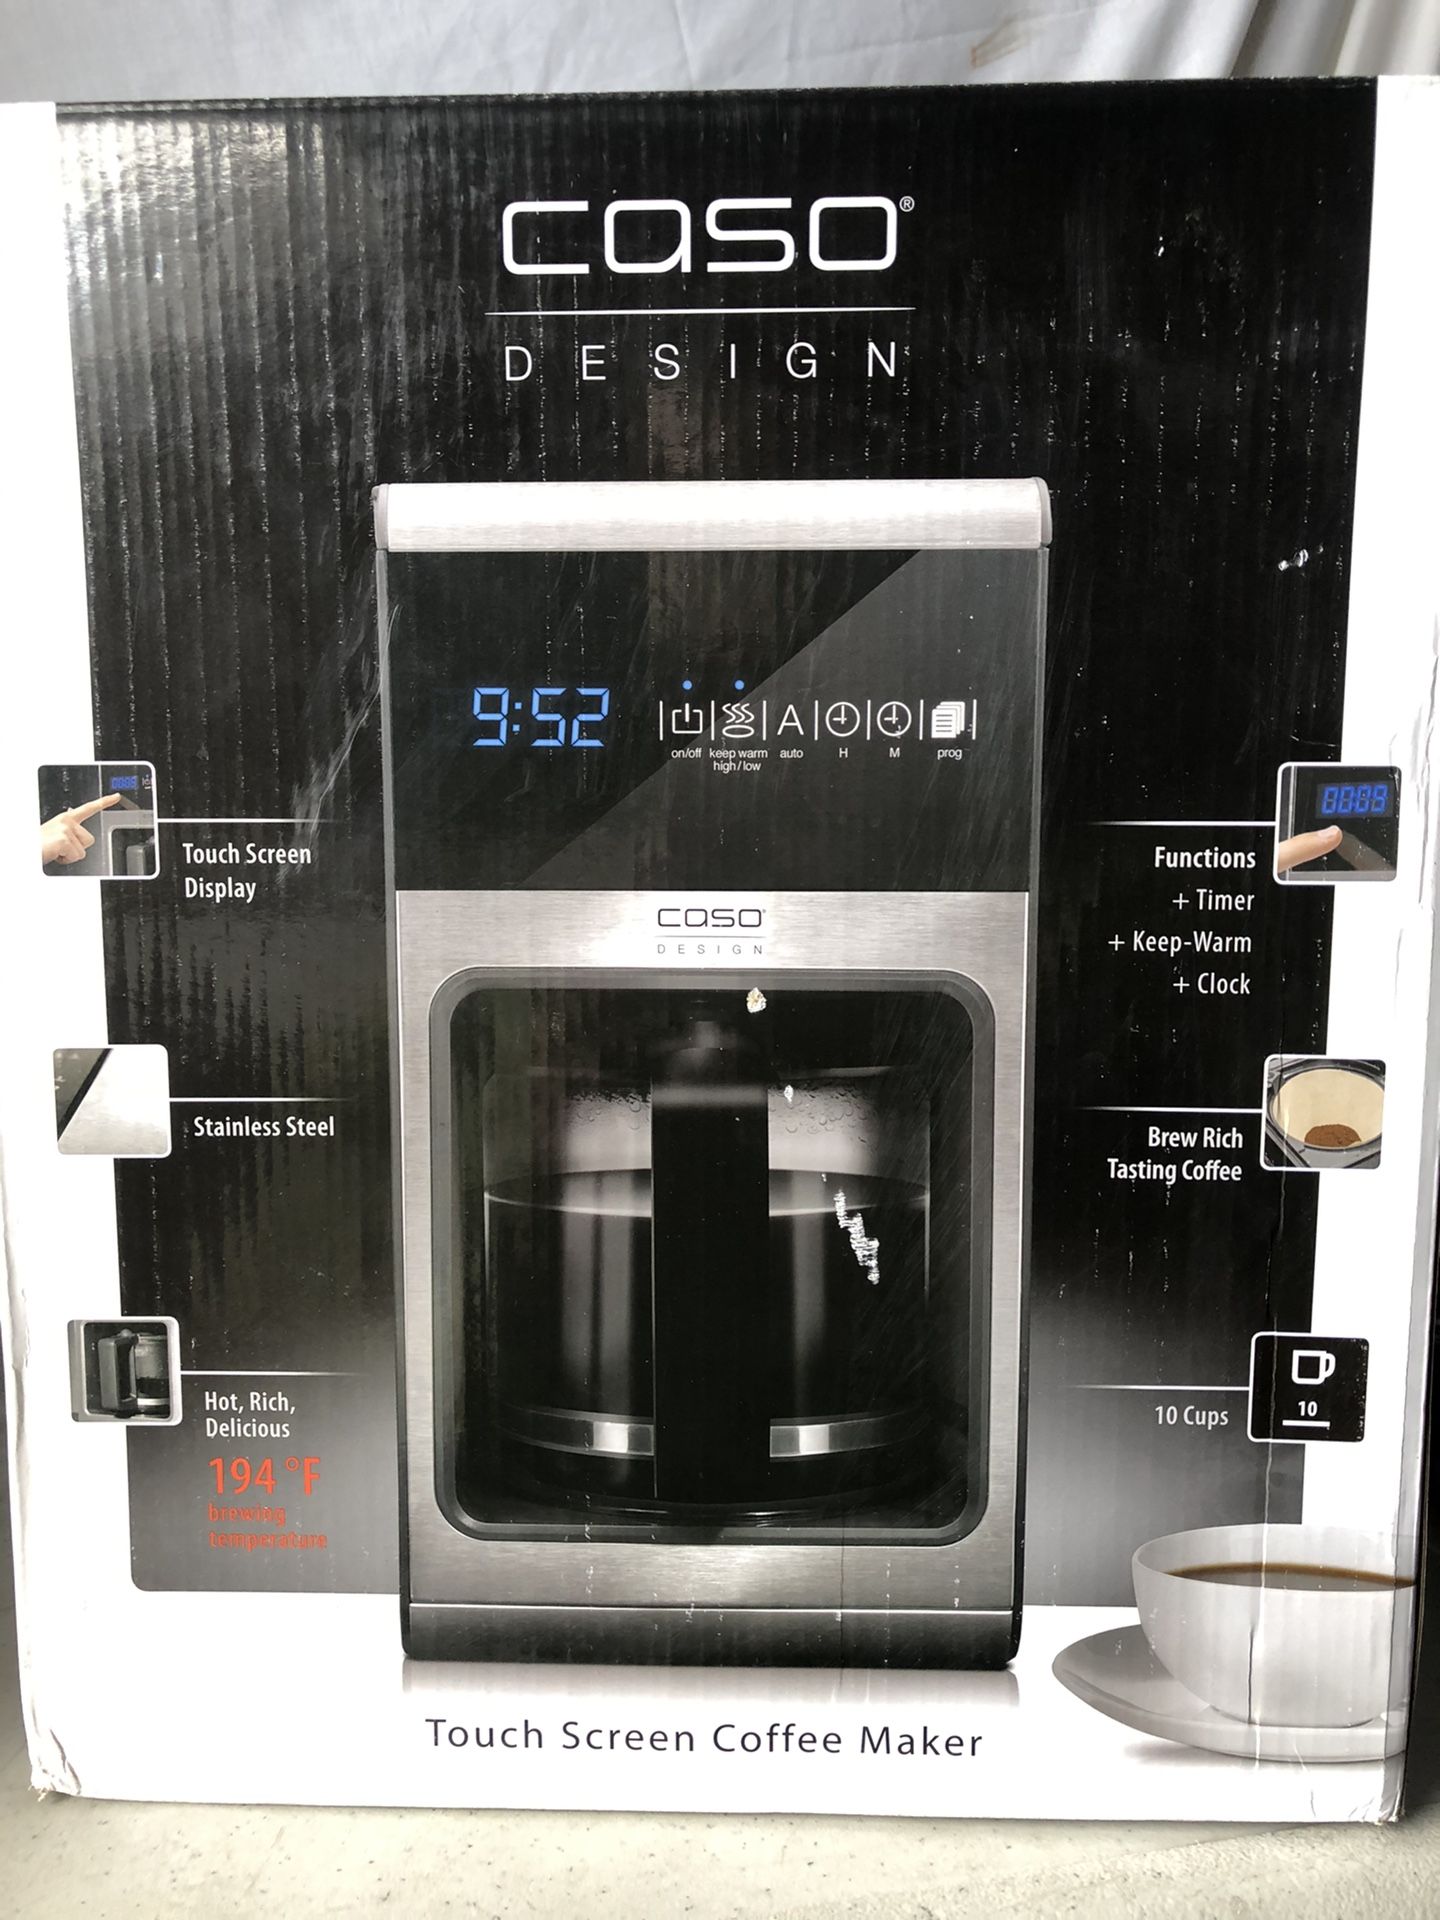 PRICE IS FIRM BRAND NEW NEVER USED IN ORIGINAL BOX Caso Coffee One 10-Cup 1100 Brewing System  Retail price at the stores $99.  MY PRICE: $60  You are